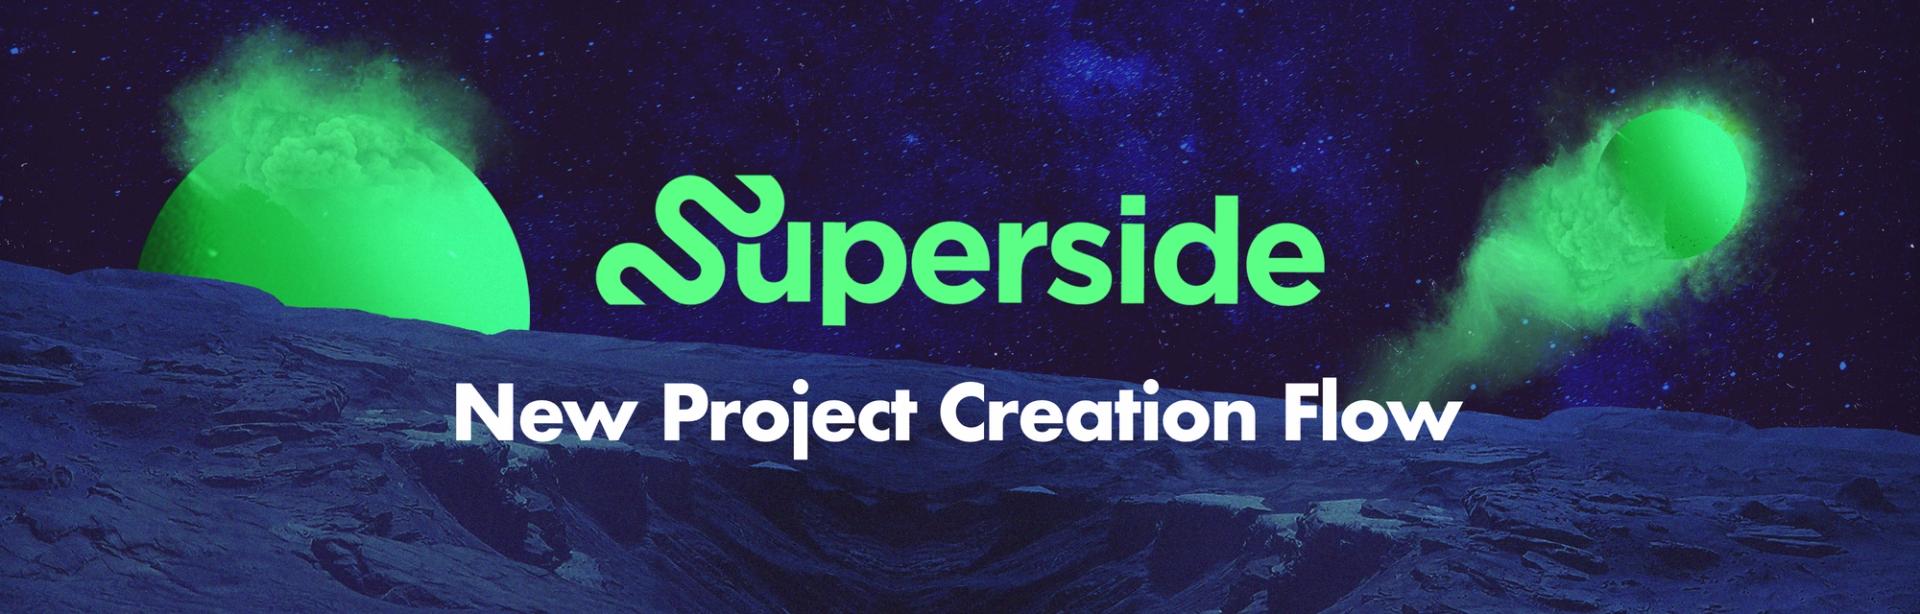 Superside Update: Easily Create & Share Projects